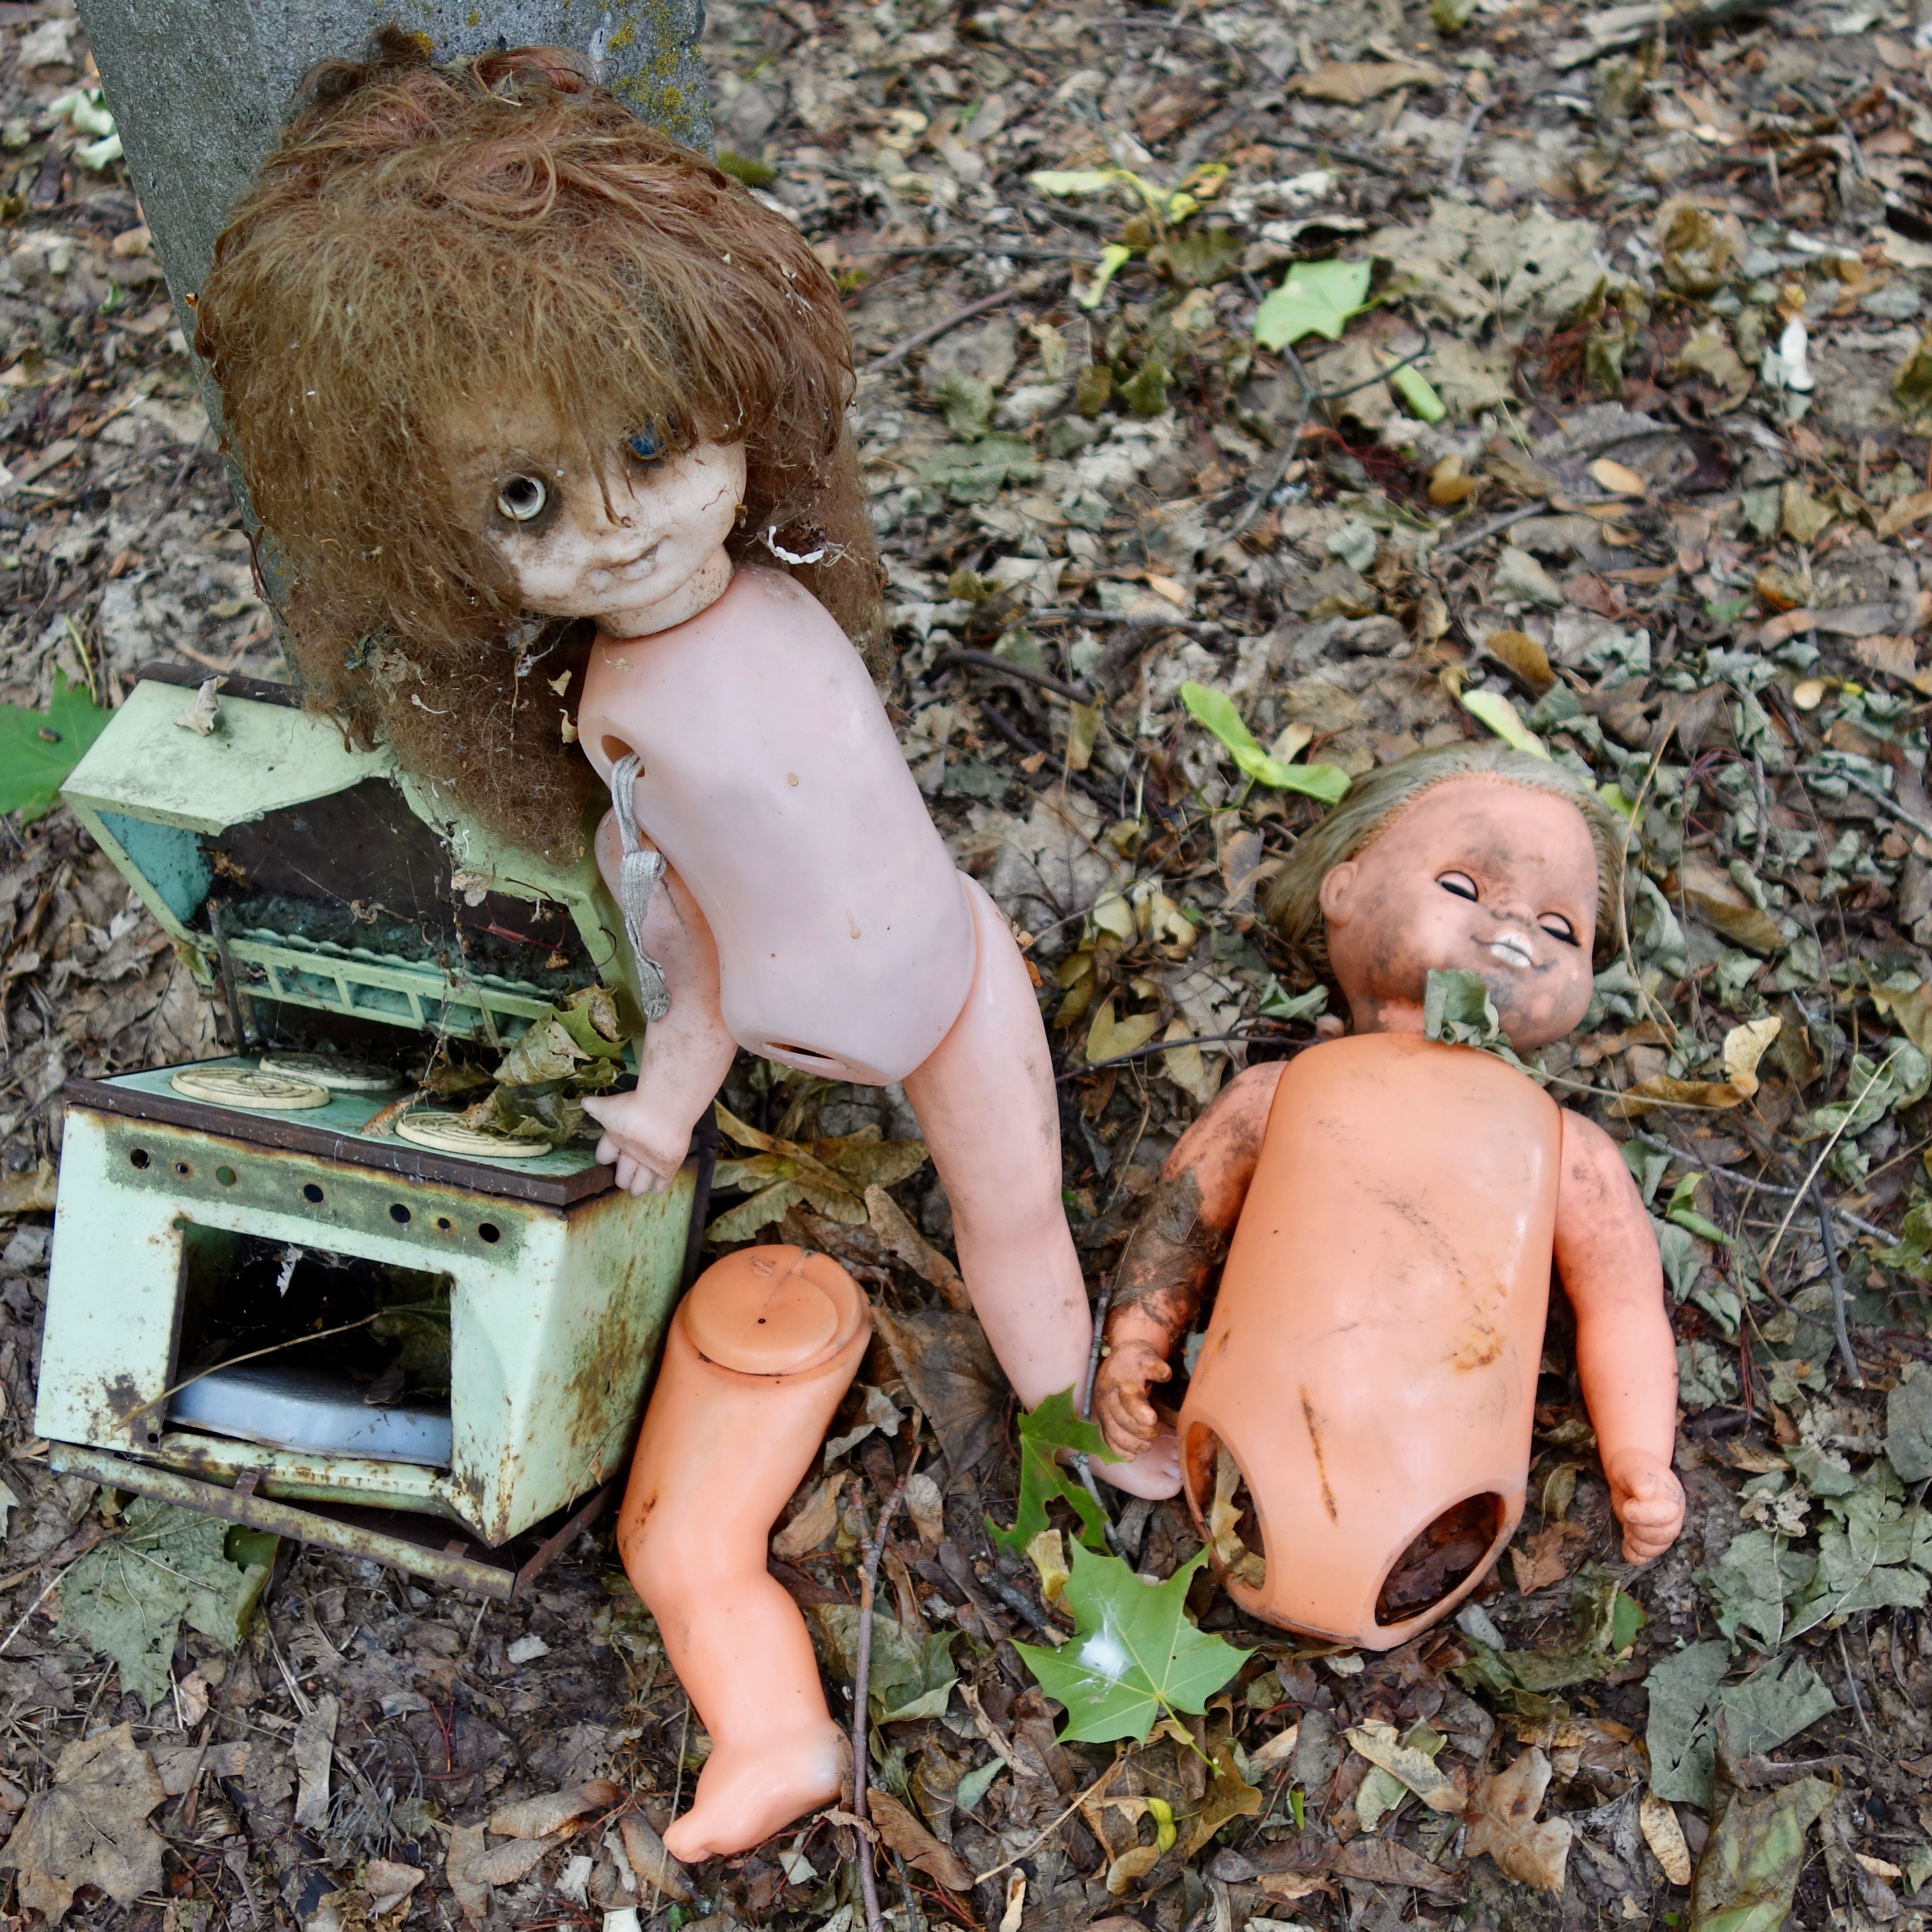 Dolls discarded during the Chernobyl crisis of April 1986 are strewn on a forest floor near the small village of Chernobyl, only miles from Reactor Four, which exploded.  The two dolls are dismembered and sit next to a child's play stove, which is green. 